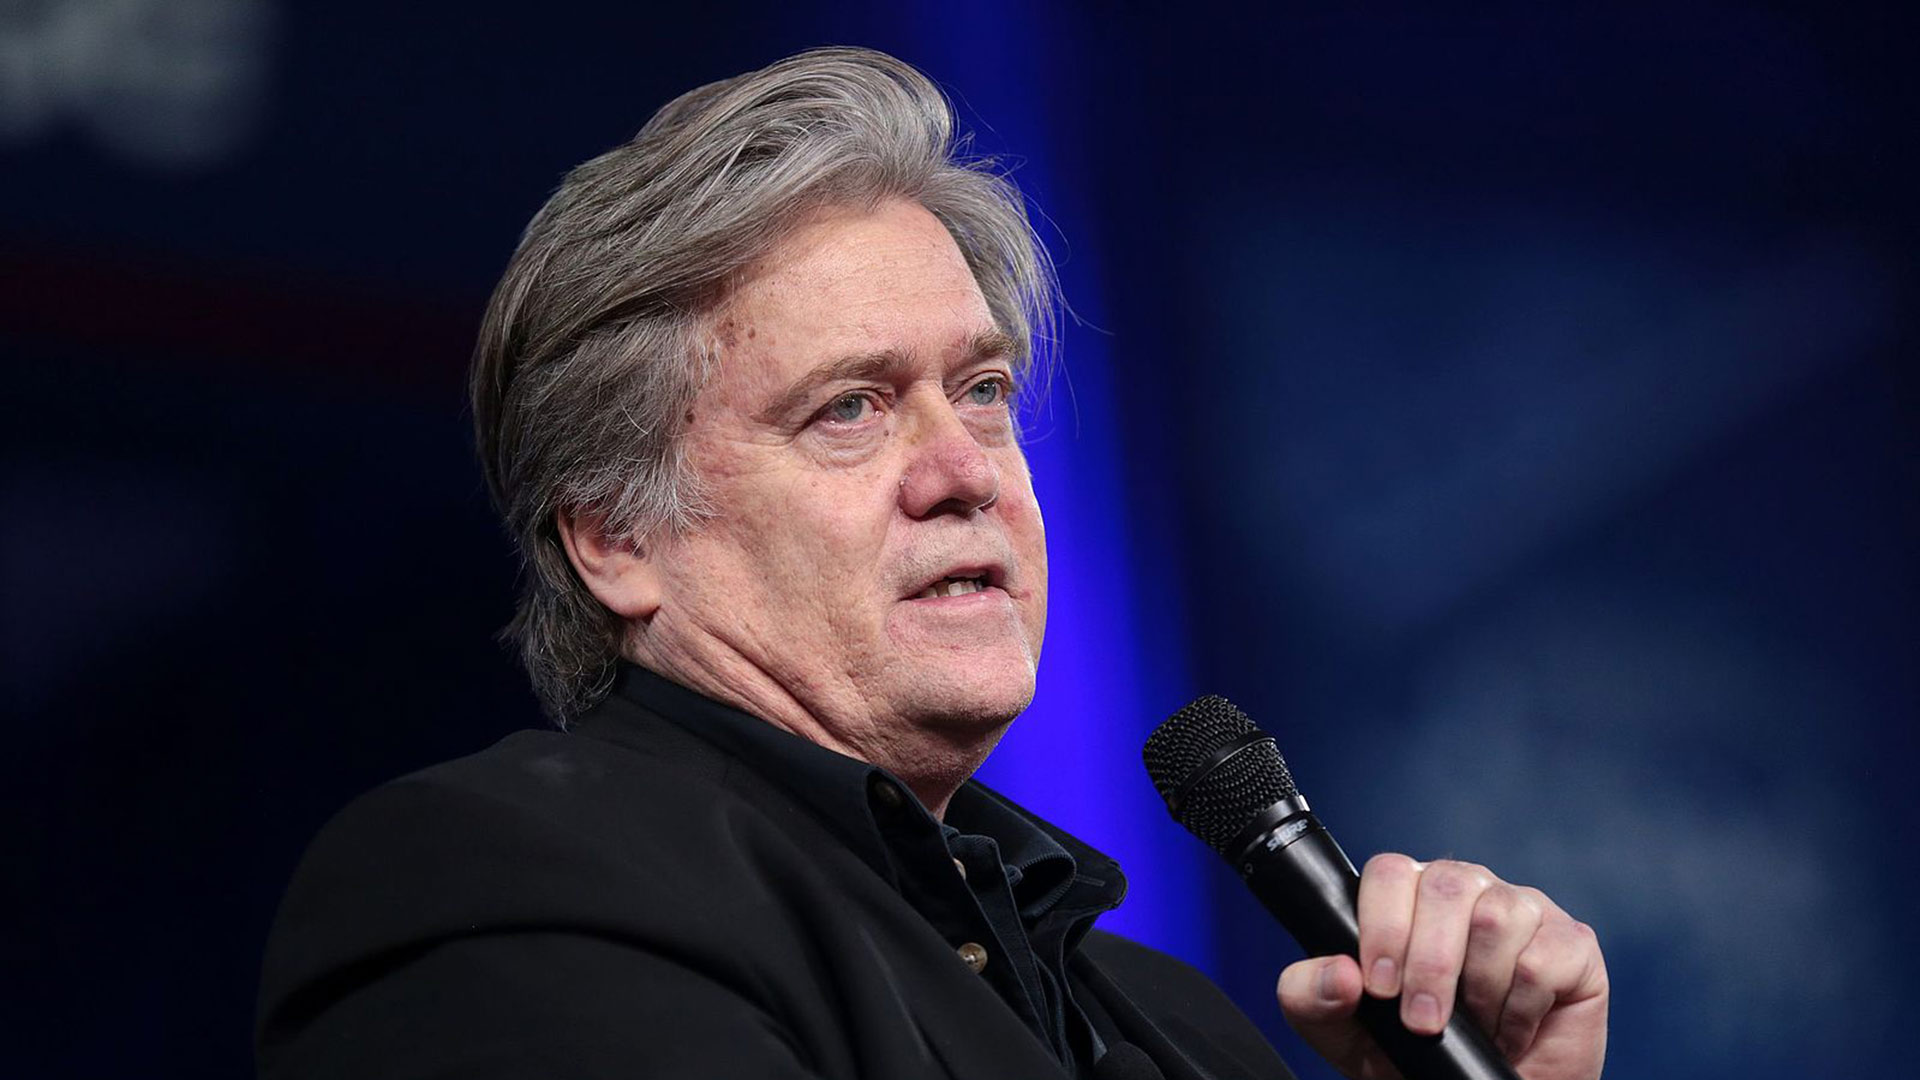 Breitbart News chairman and former White House chief strategist Steve Bannon.